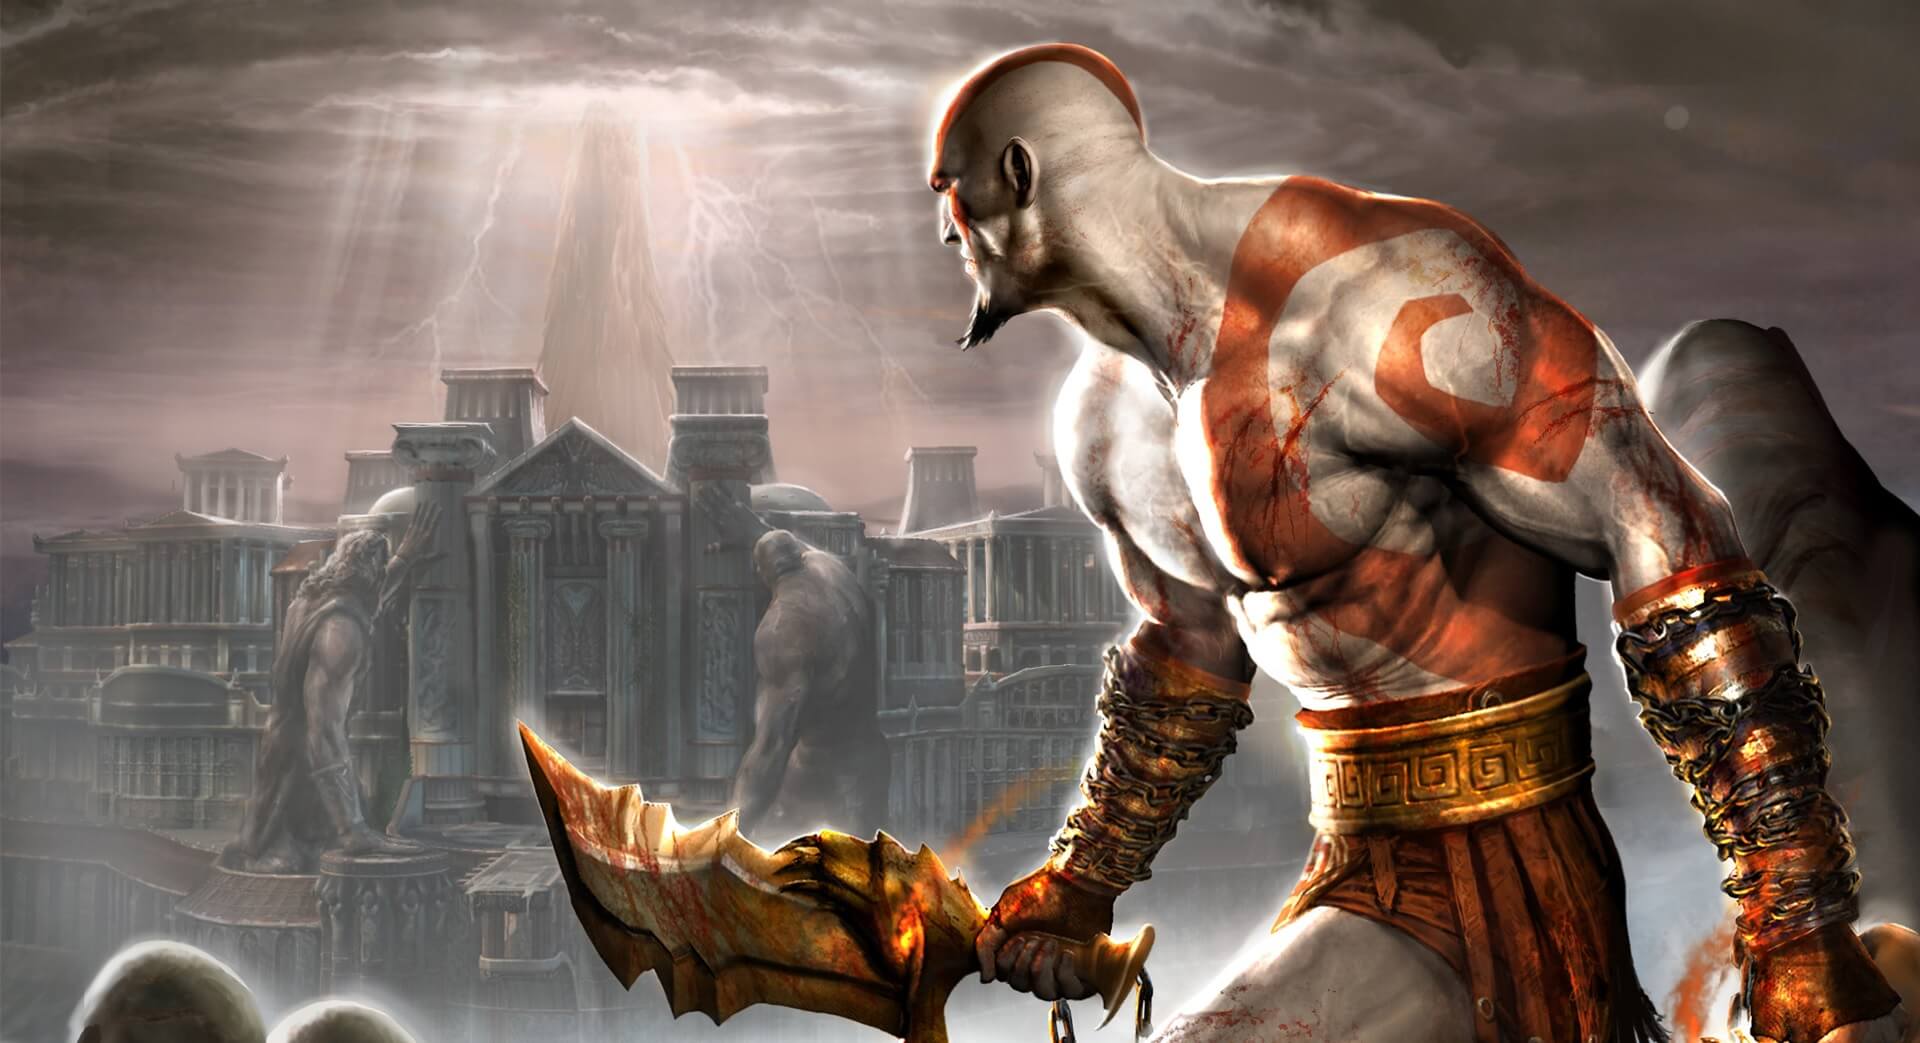 Playstation 2 classic God of War 2 in 4K with Reshade Ray Tracing on the  PC